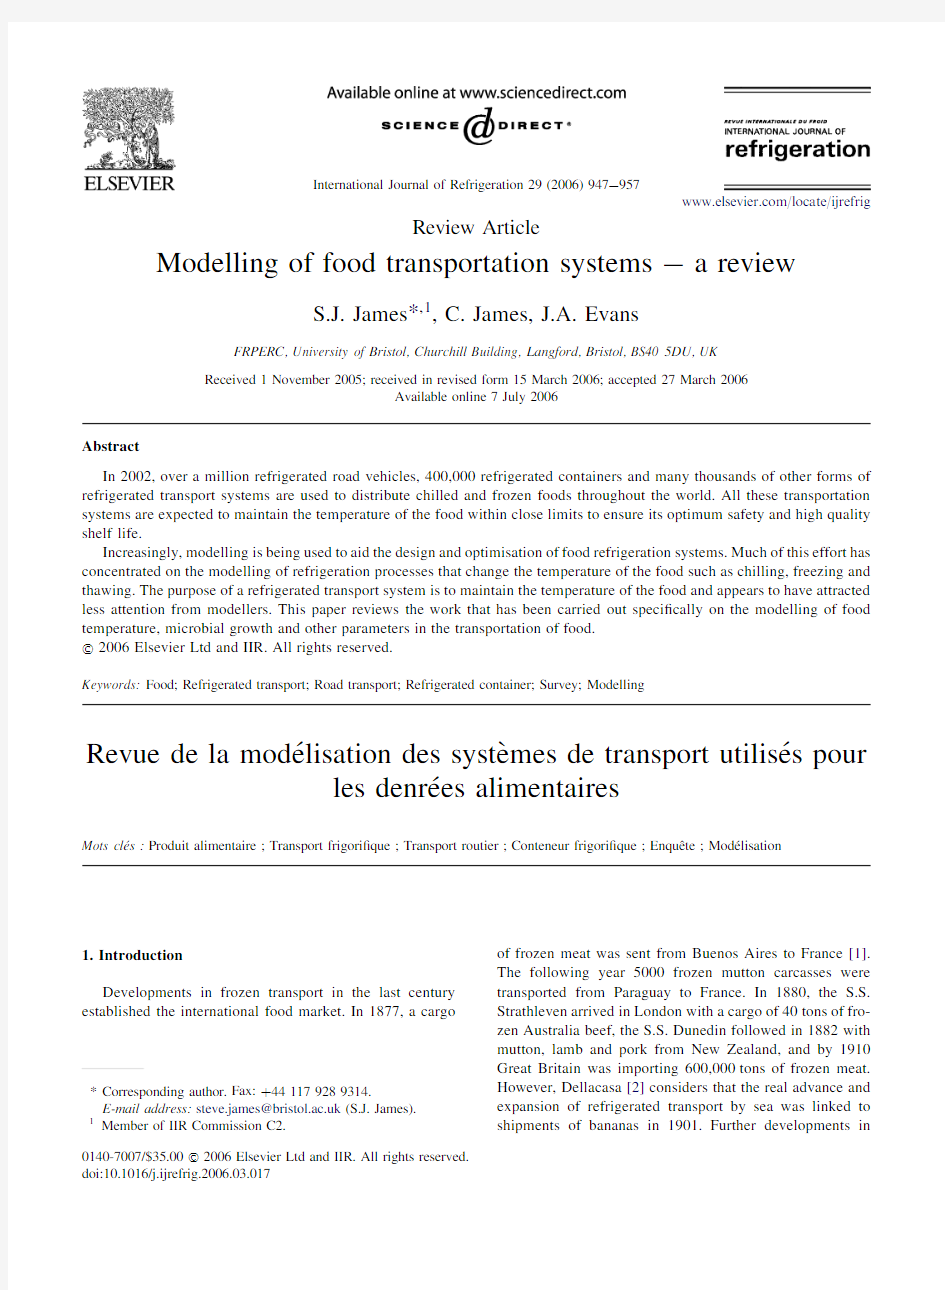 Modelling of food transportation systems – a review